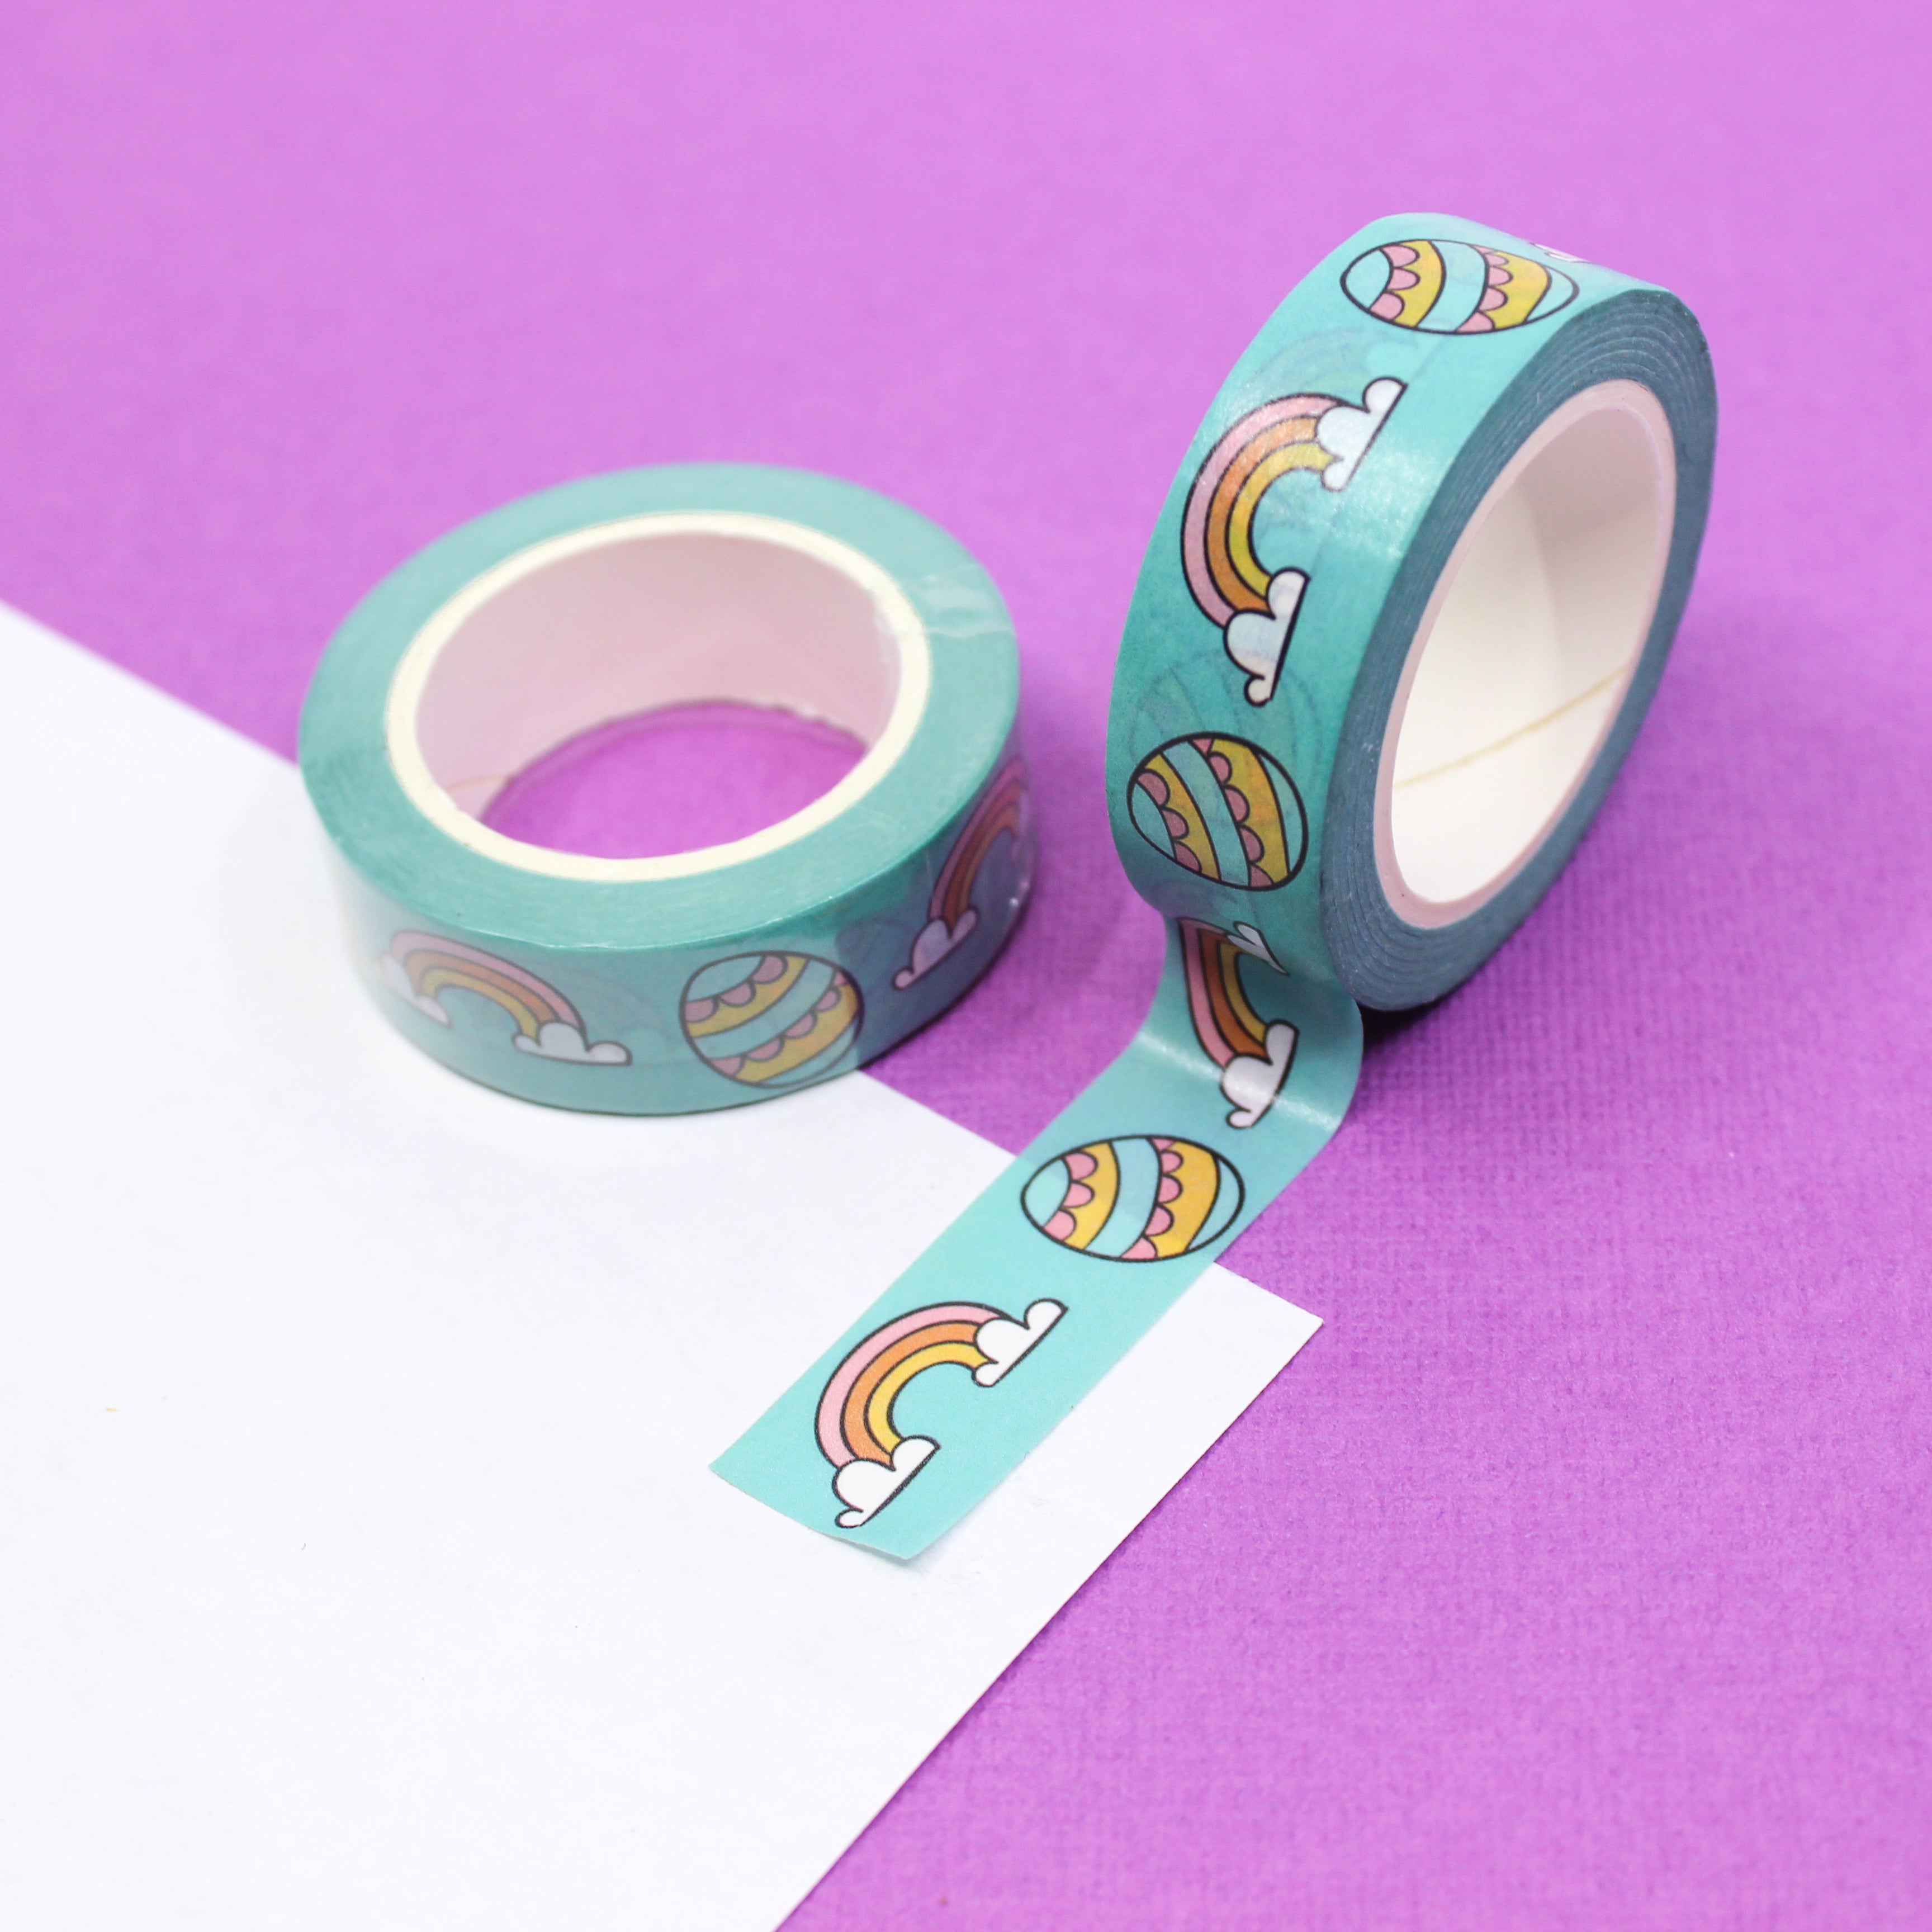 This is a blue rainbow and Easter egg view themed washi tape from BBB Supplies Craft Shop